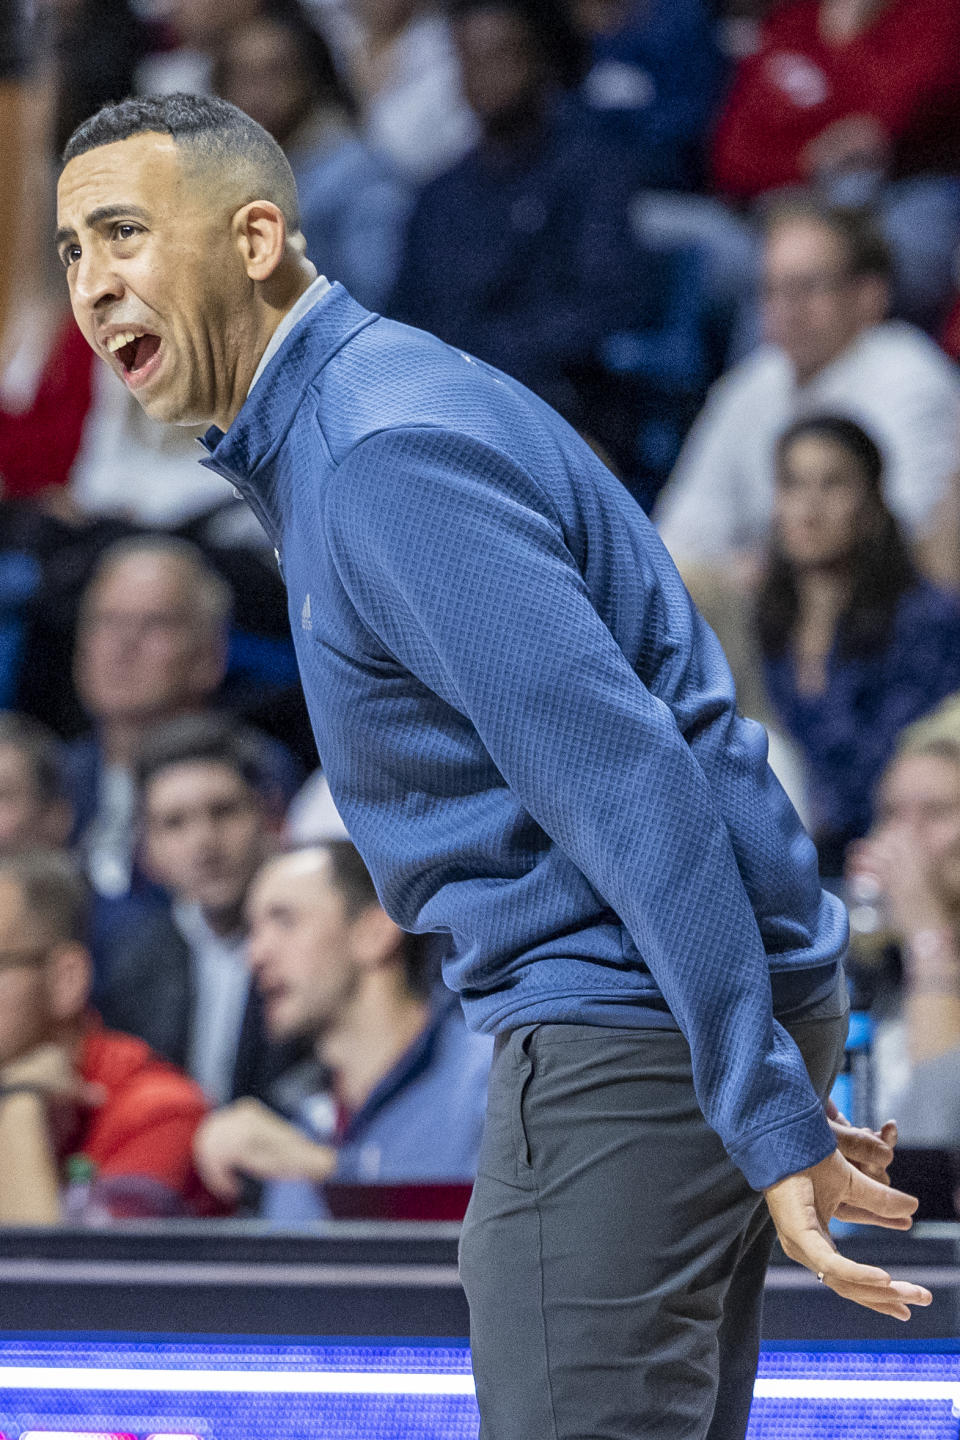 South Alabama head coach Richie Riley works with his team during the first half of an NCAA college basketball game against Alabama, Tuesday, Nov. 15, 2022, in Mobile, Ala. (AP Photo/Vasha Hunt)